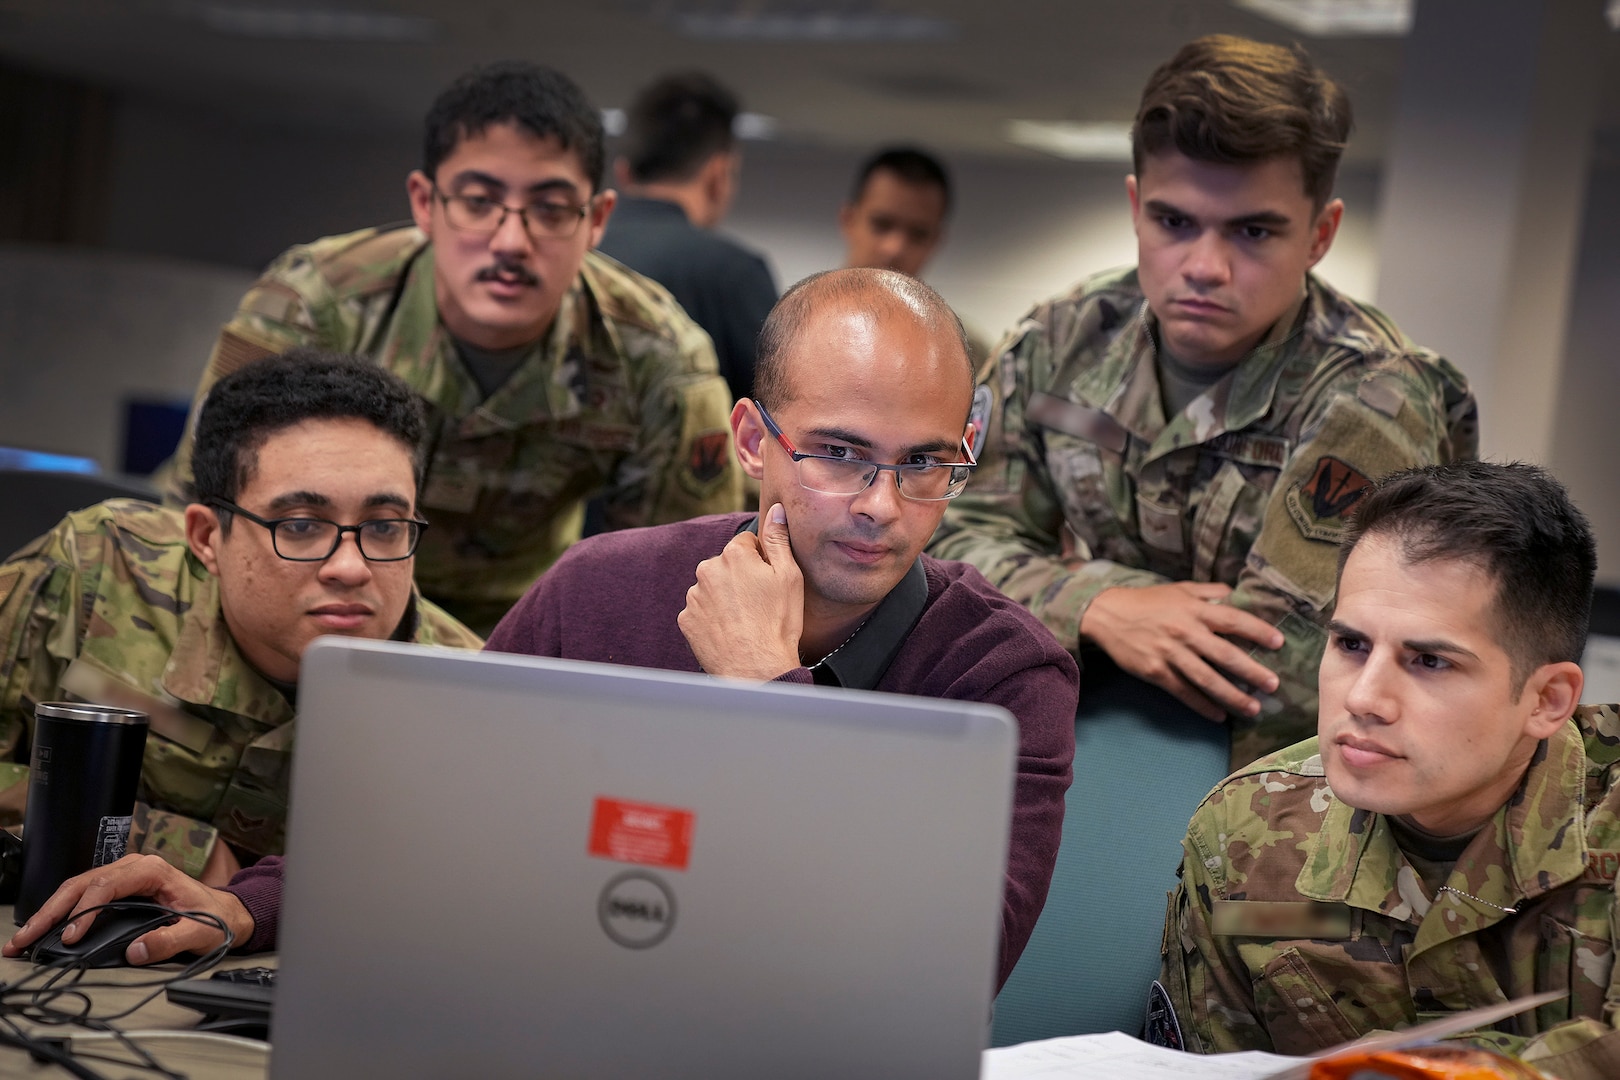 U.S. Cyber Command cyber warriors and a French cyber professional collaborate during the training exercise, Cyber Fort III, at Fort George G. Meade, Md., July 21, 2021.